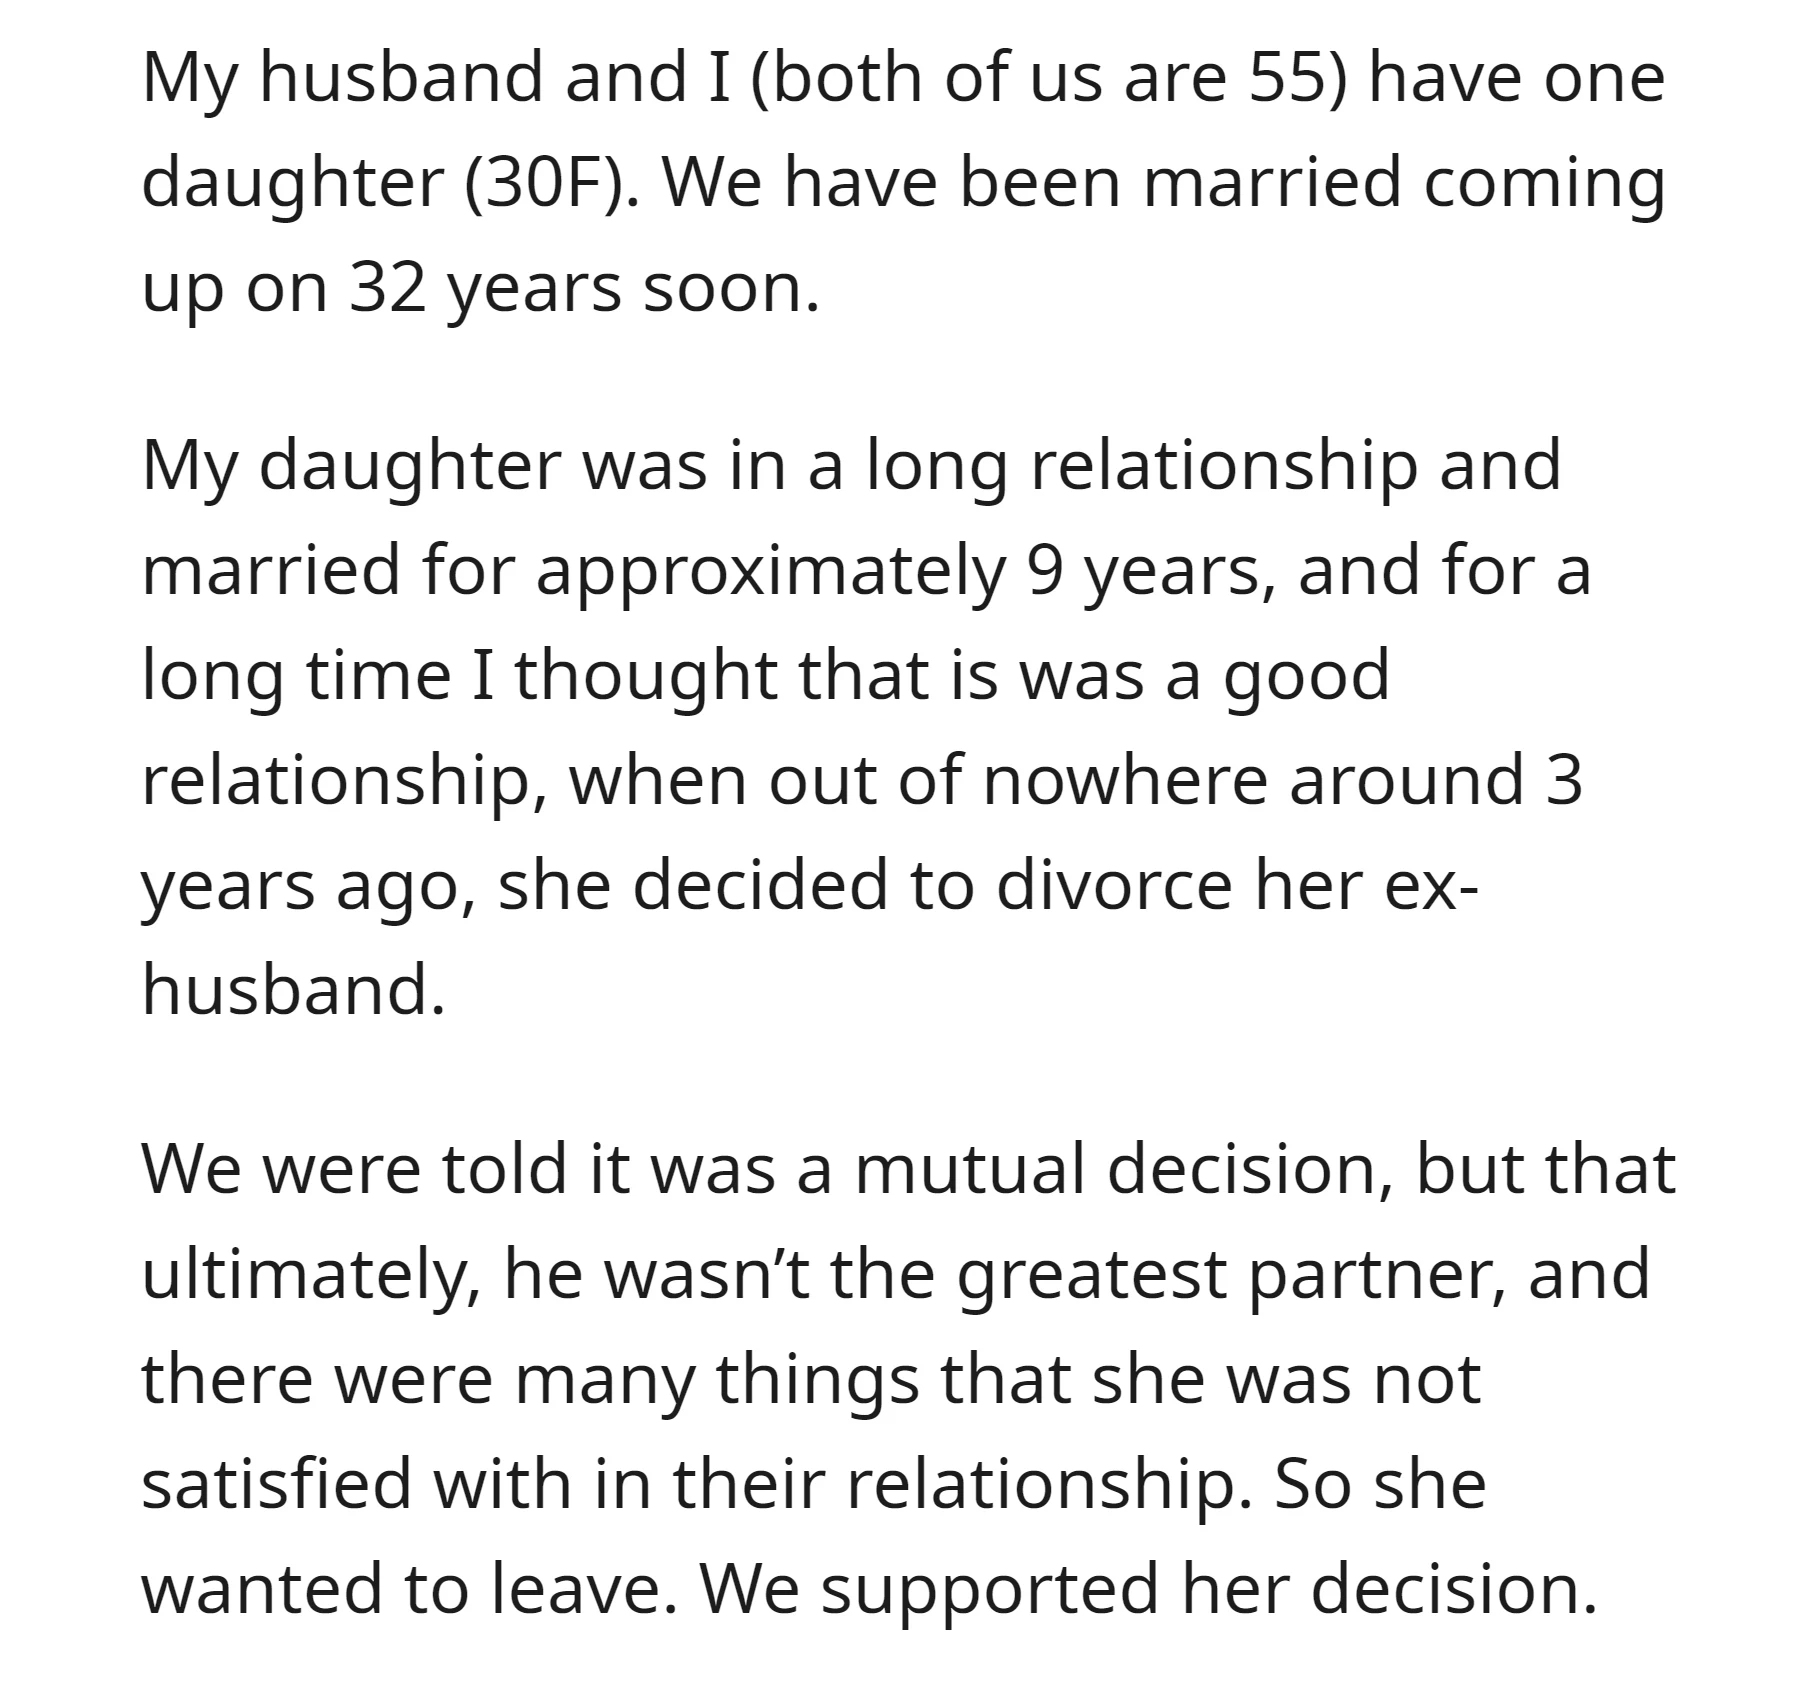 OP's daughter unexpectedly divorced her husband and sought OP's help